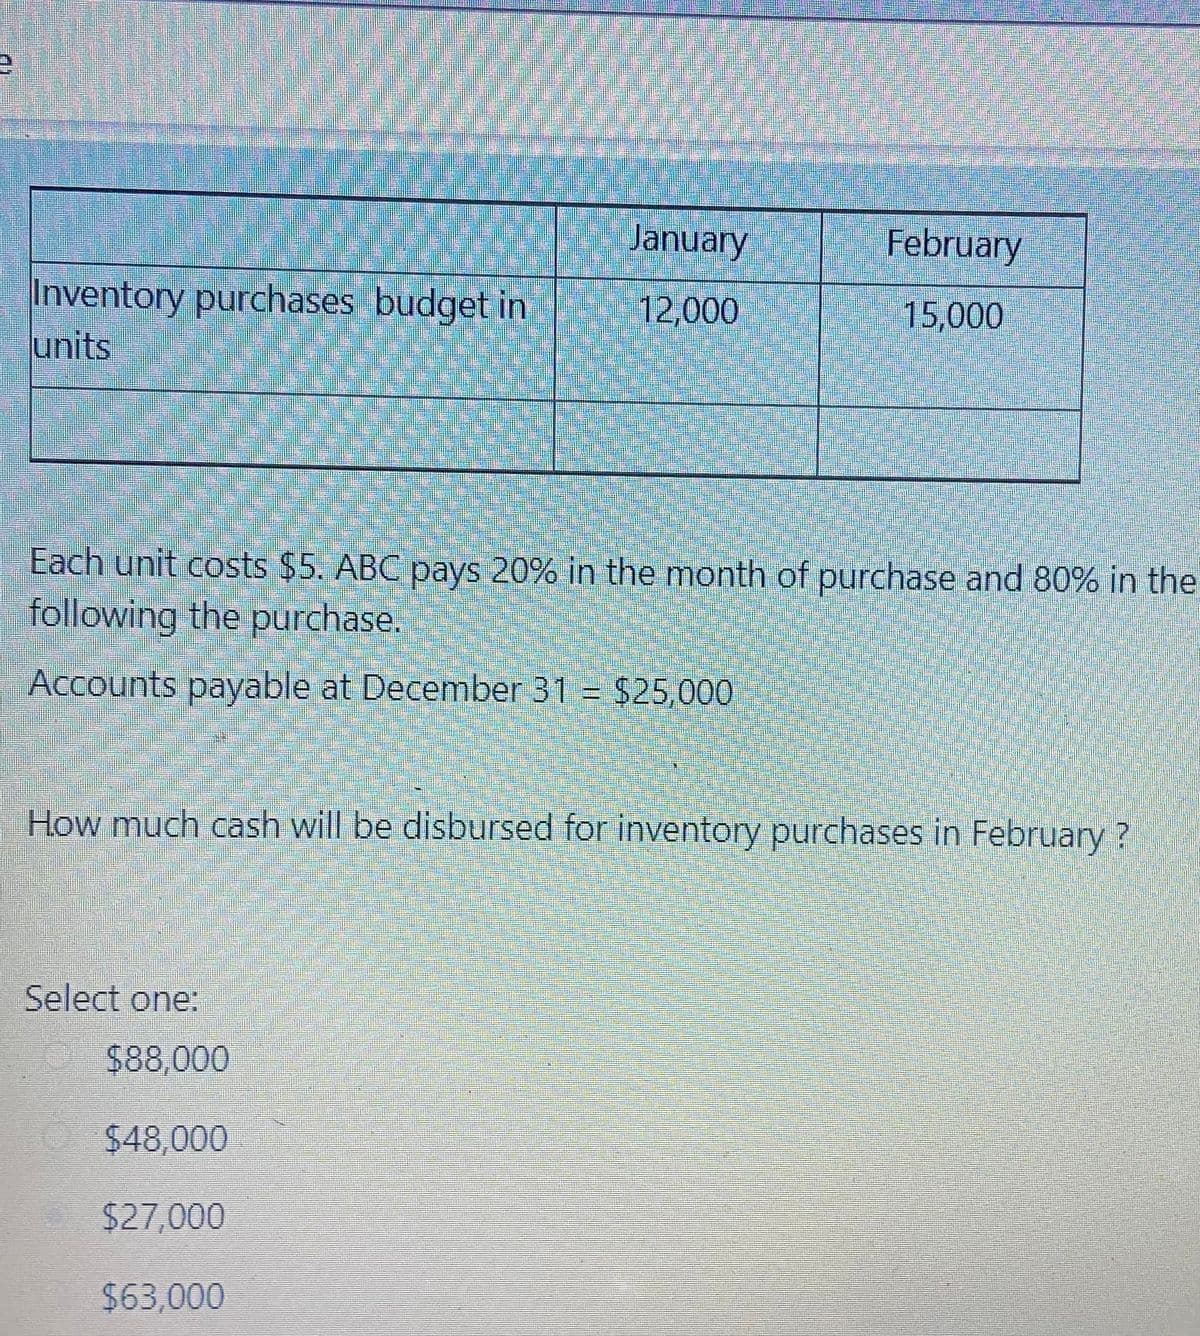 January
February
Inventory purchases budget in
units
12,000
15,000
Each unit costs $5. ABC pays 20% in the month of purchase and 80% in the
following the purchase.
Accounts payable at December 31 = $25,000
How much cash will be disbursed for inventory purchases in February?
Select one:
$88,000
$48,000
$27,000
$63,000
